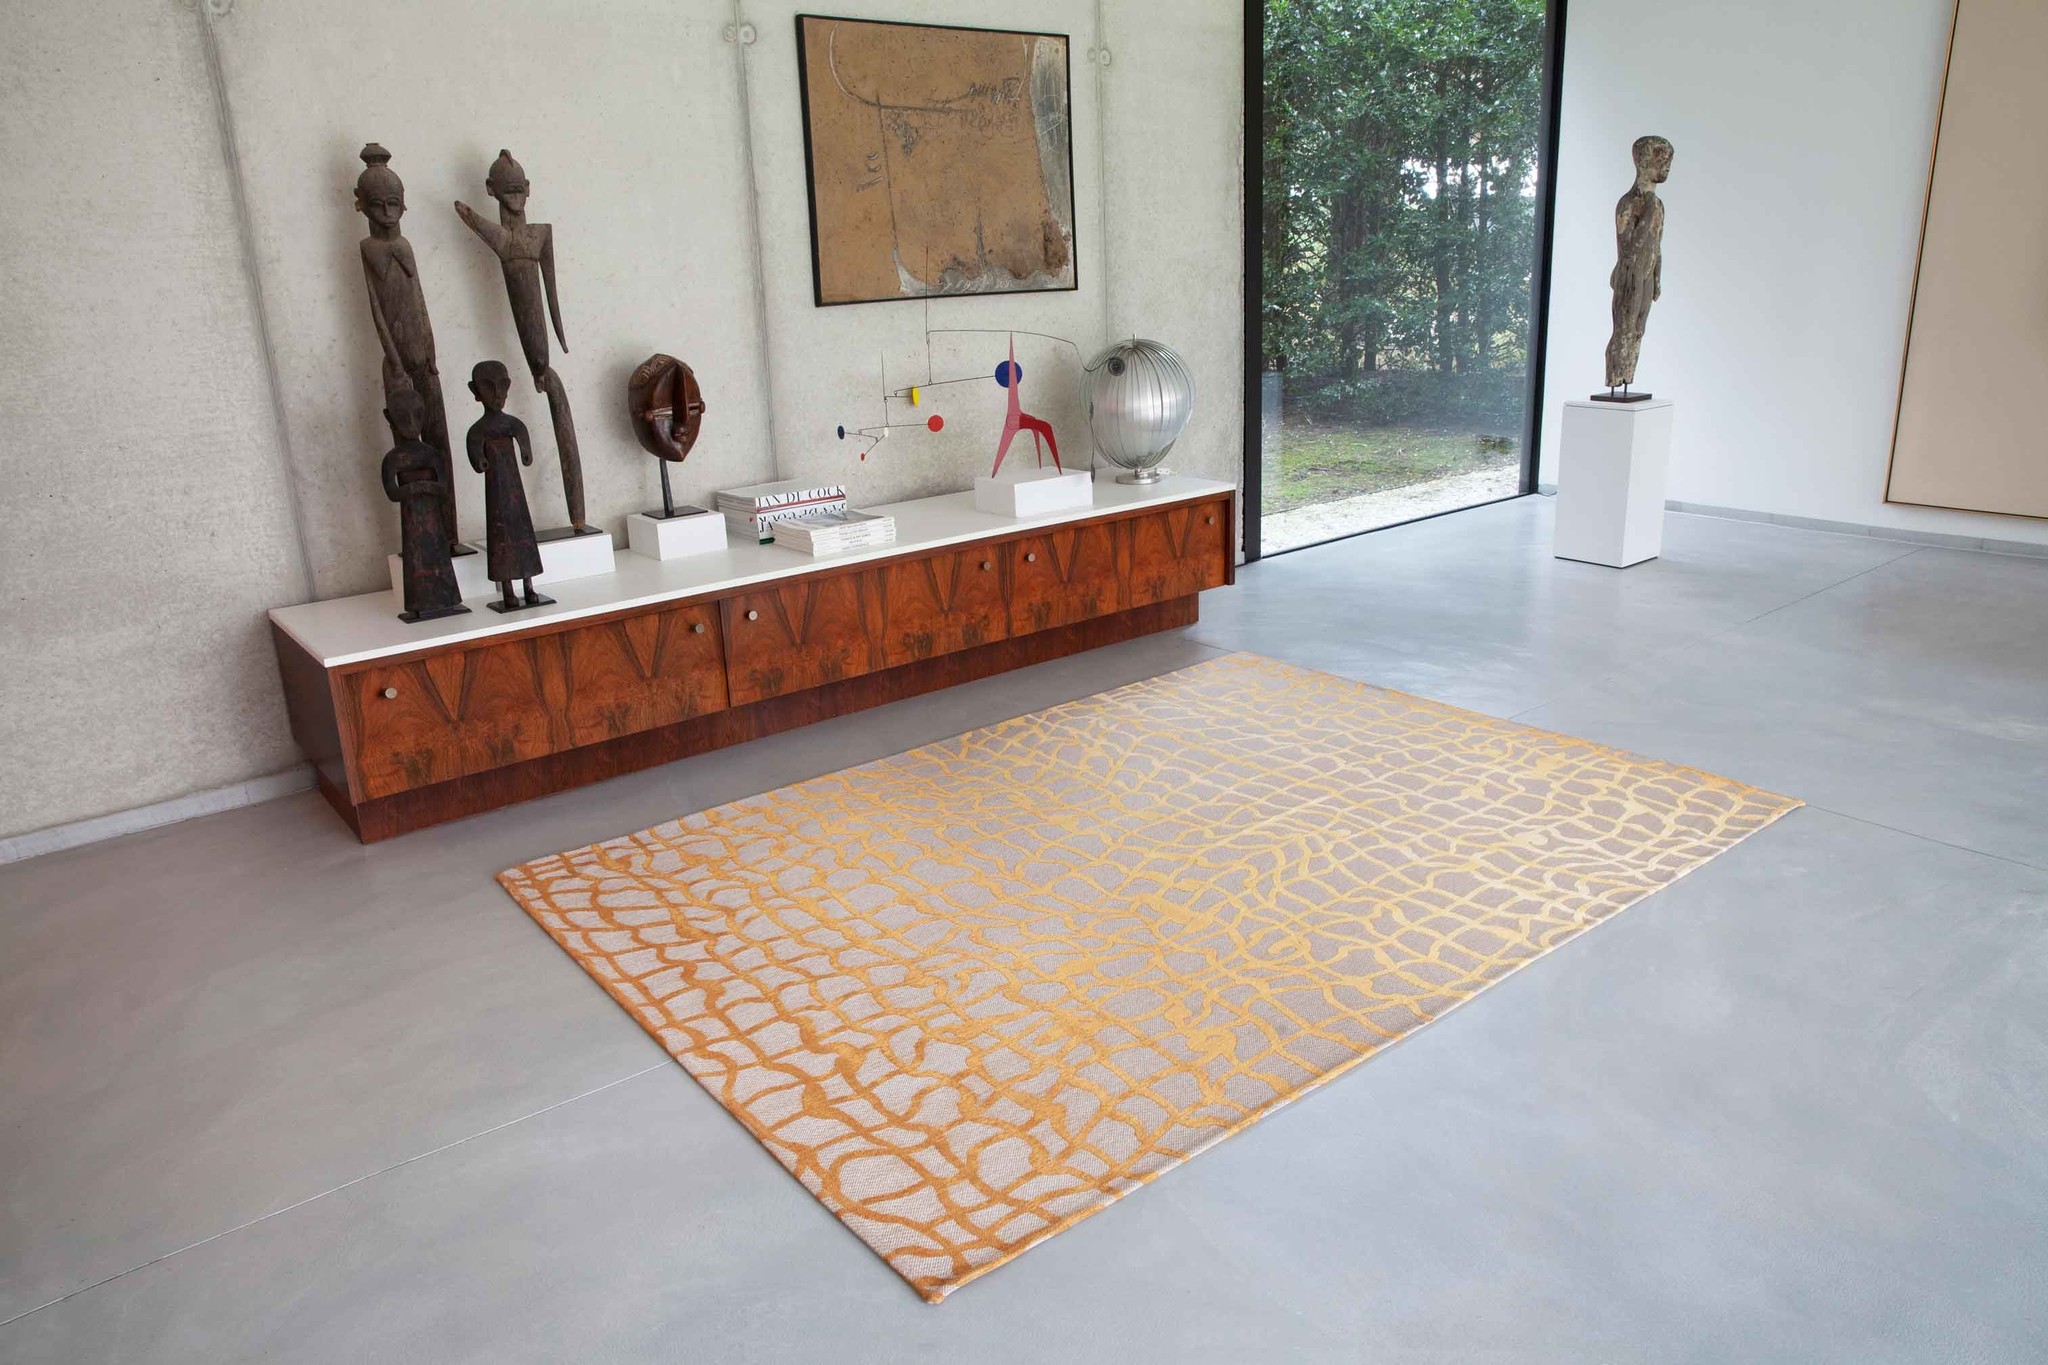 Gold Flatwoven Rug ☞ Size: 2' 7" x 8' 2" (80 x 250 cm)